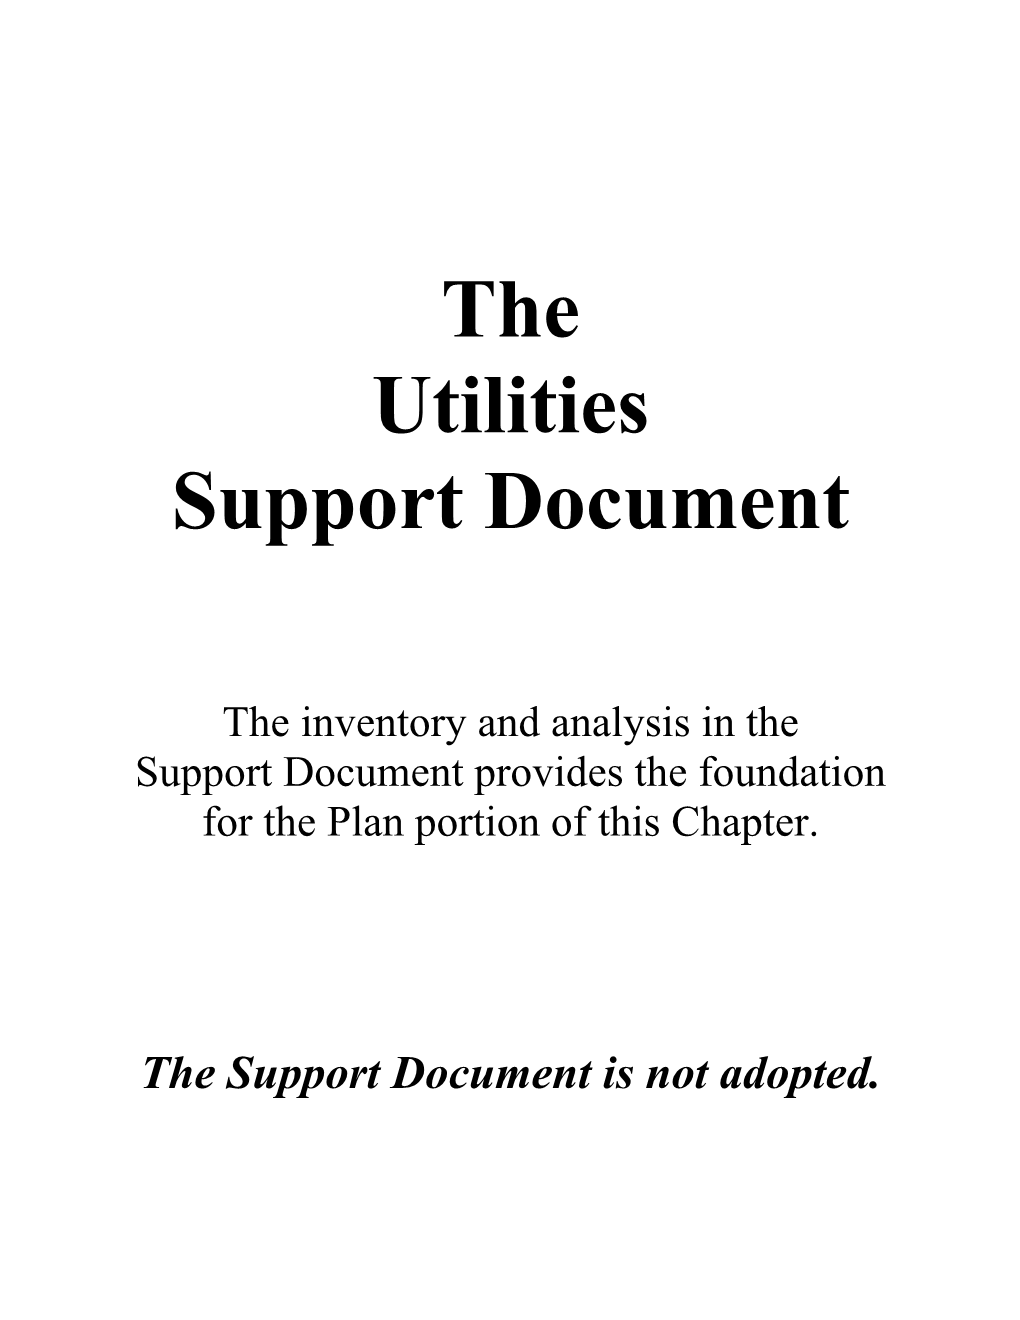 The Utilities Support Document